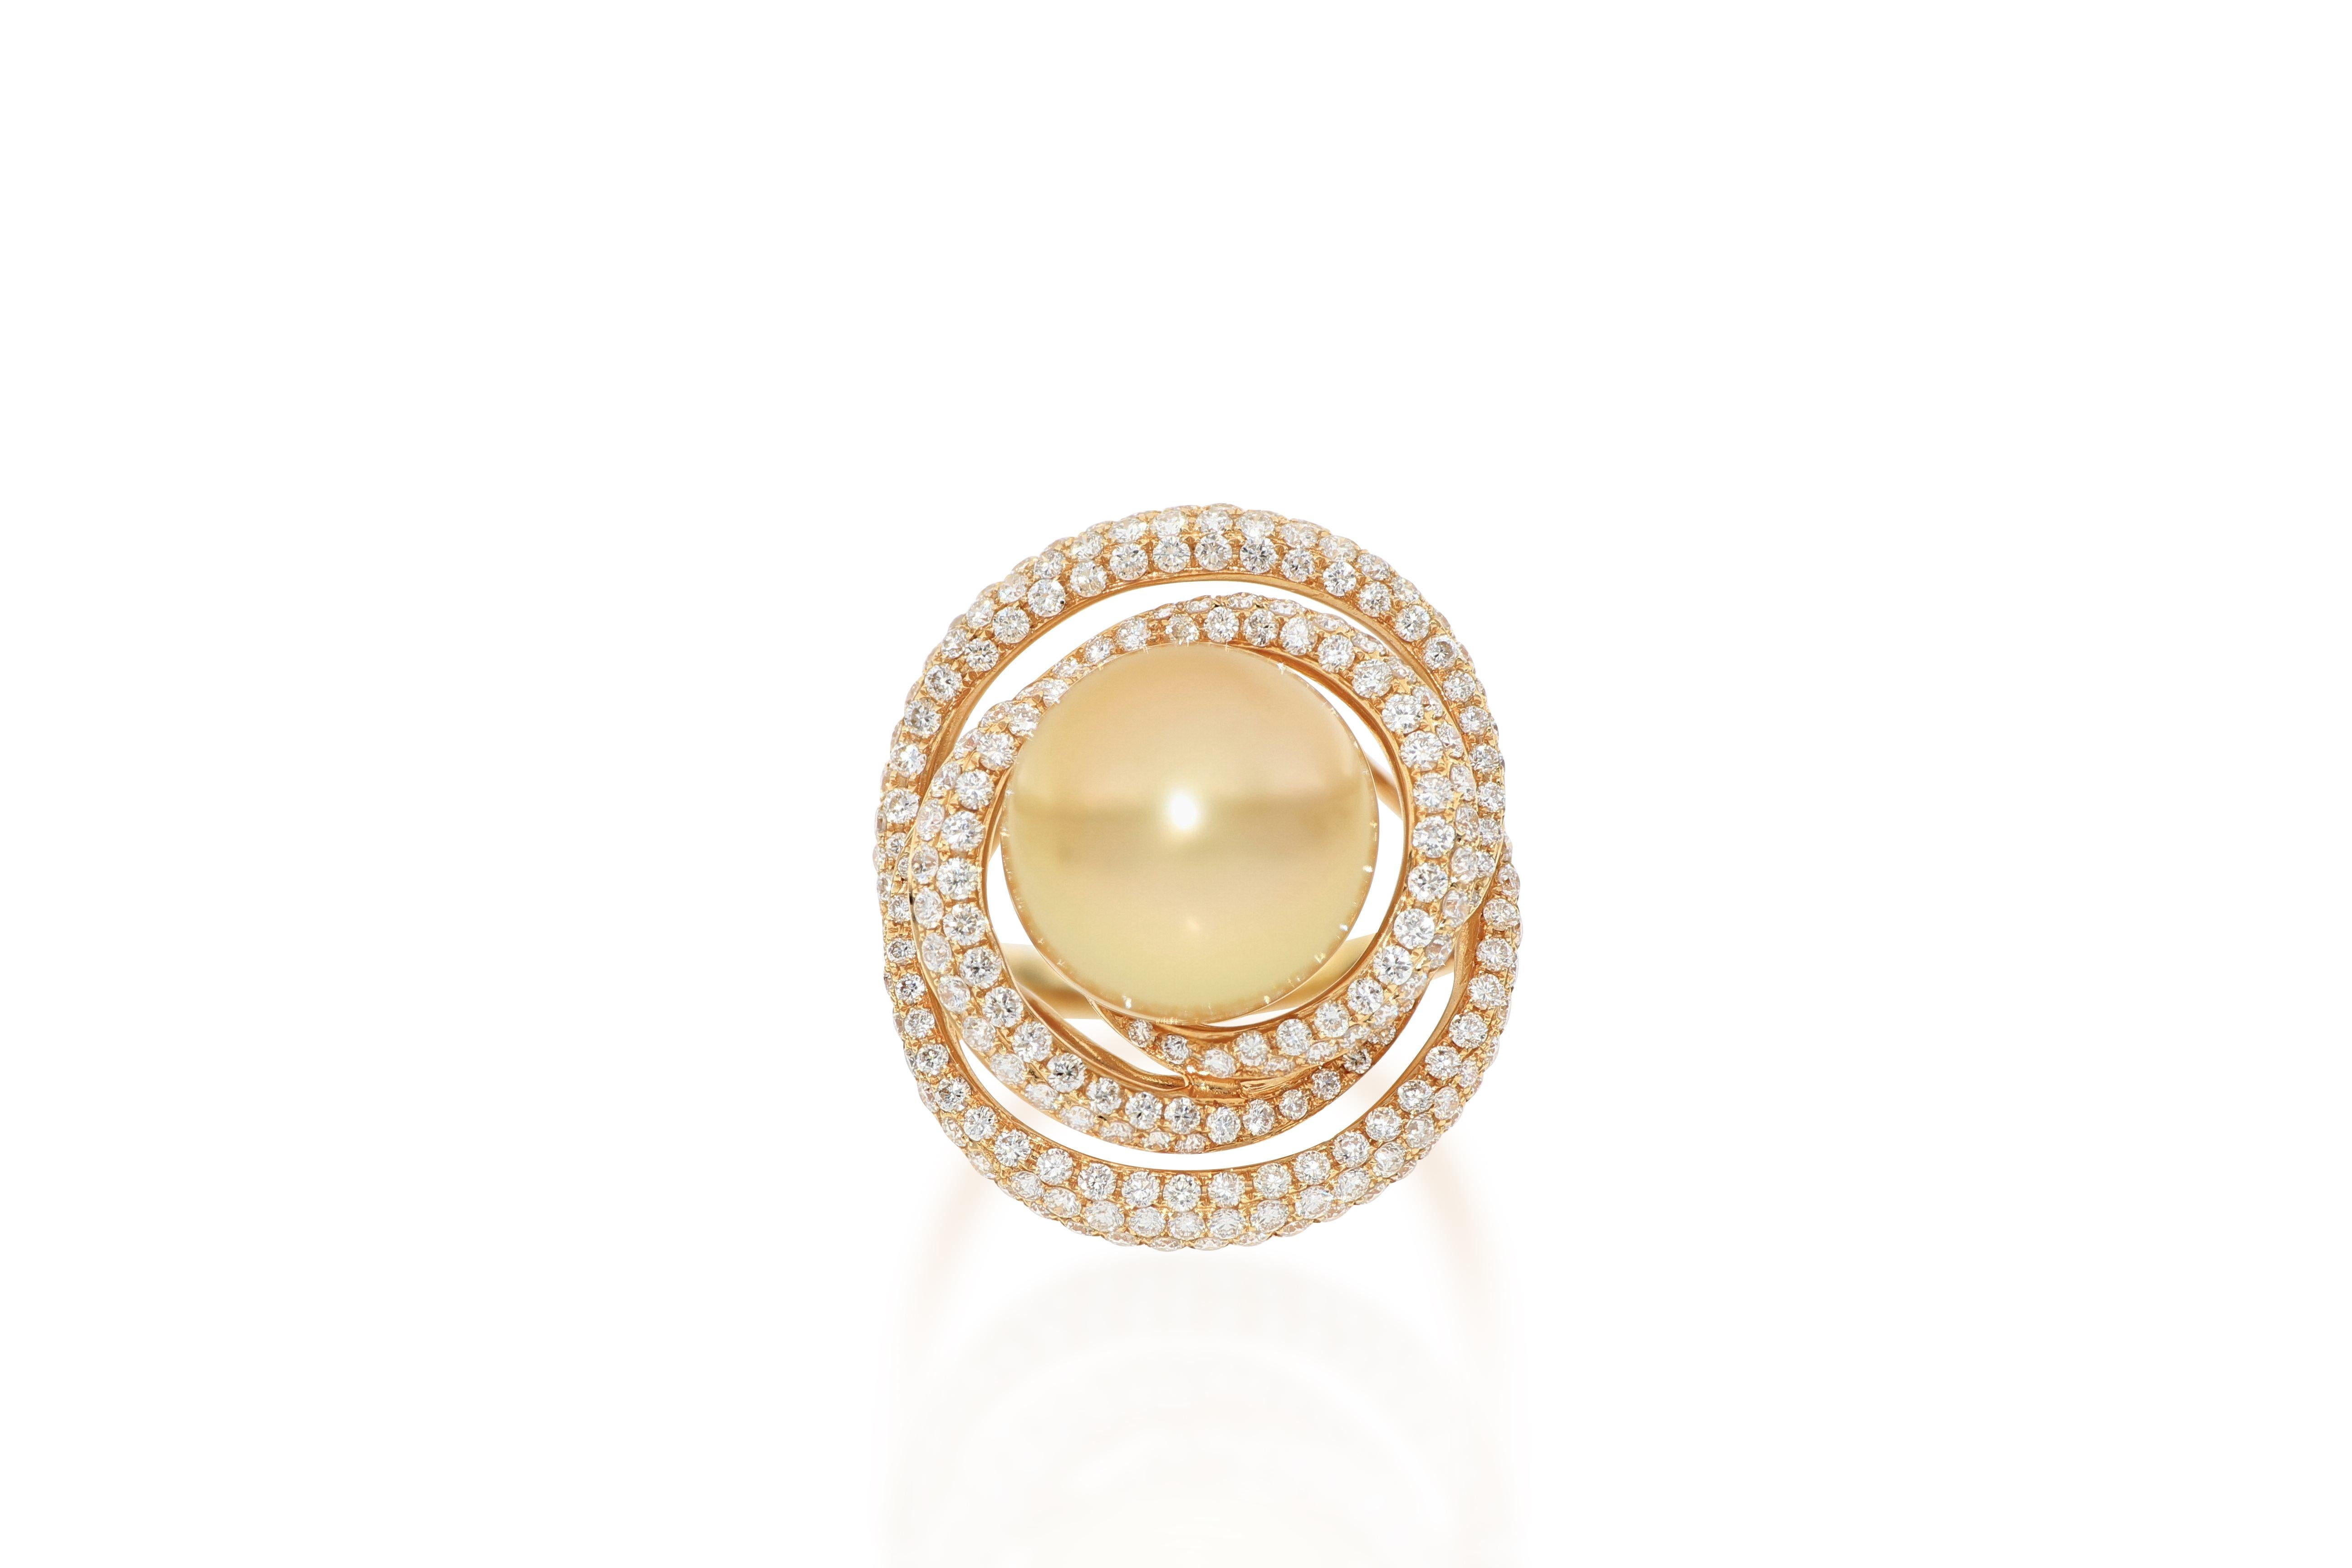 The elegant ring centering on a fabulous South Sea Golden Pearl 13 mm, is surrounded by brilliant-cut diamonds weighing 1.88 carats, mounted in 18 karat rose gold.
The company was founded one and a half centuries ago in Macau. The brand is renowned